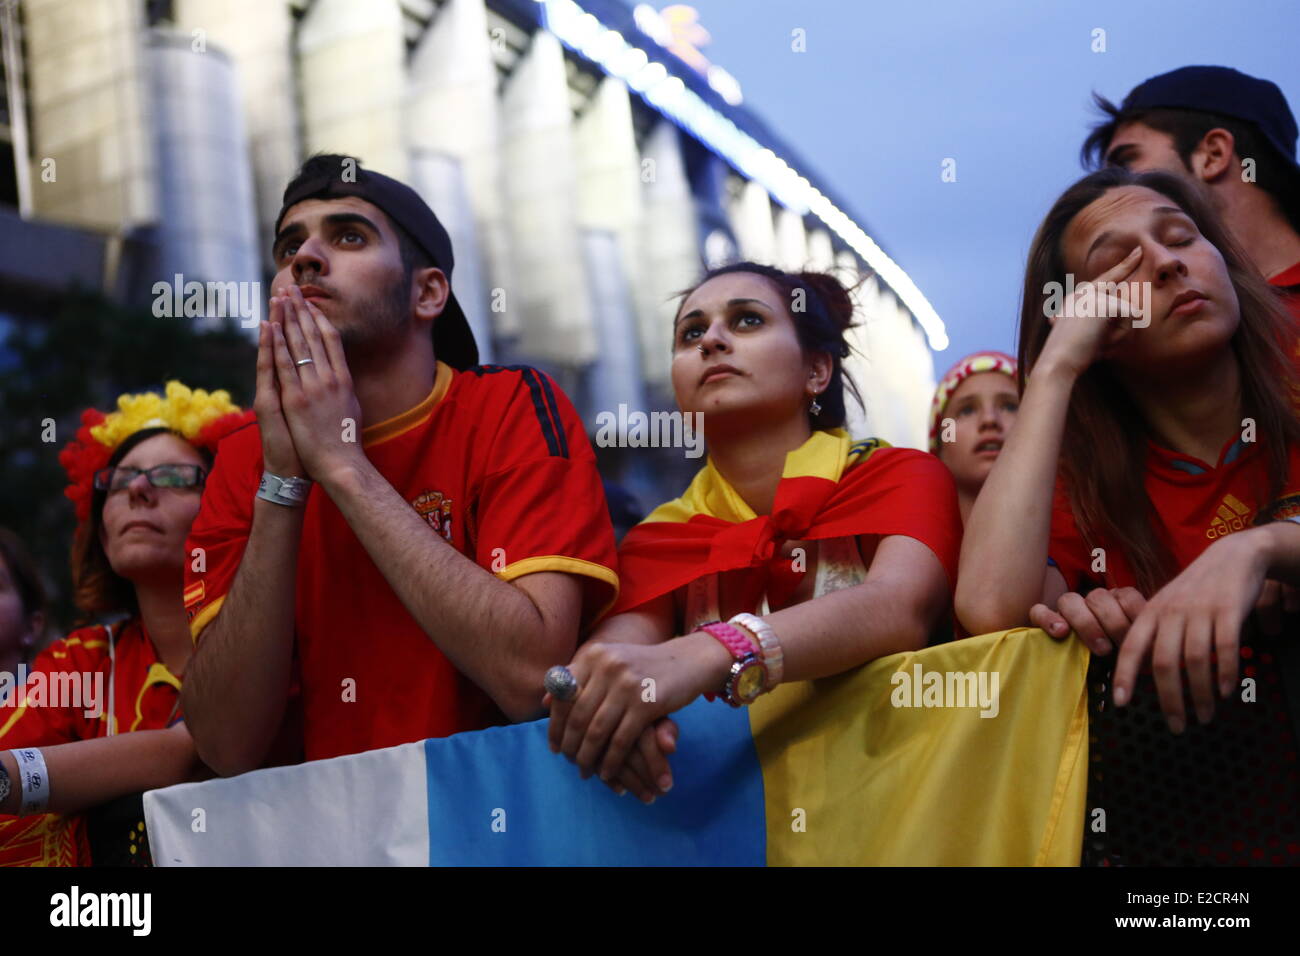 Madrid, Spain. 19th June, 2014. Spanish people reacts during the World Cup soccer match between Spain and Chile, in Madrid, Spain, Wednesday, June 18, 2014. Defending champions Spain slumped to a 2-0 defeat to Chile and crashed out of the World Cup after their second defeat in five days. Chile's victory today - through goals from Eduardo Vargas and Charles Arranguiz - made the South Americans and the Netherlands the first teams to go through to the second round. Credit:  Javier Luengo/NurPhoto/ZUMAPRESS.com/Alamy Live News Stock Photo